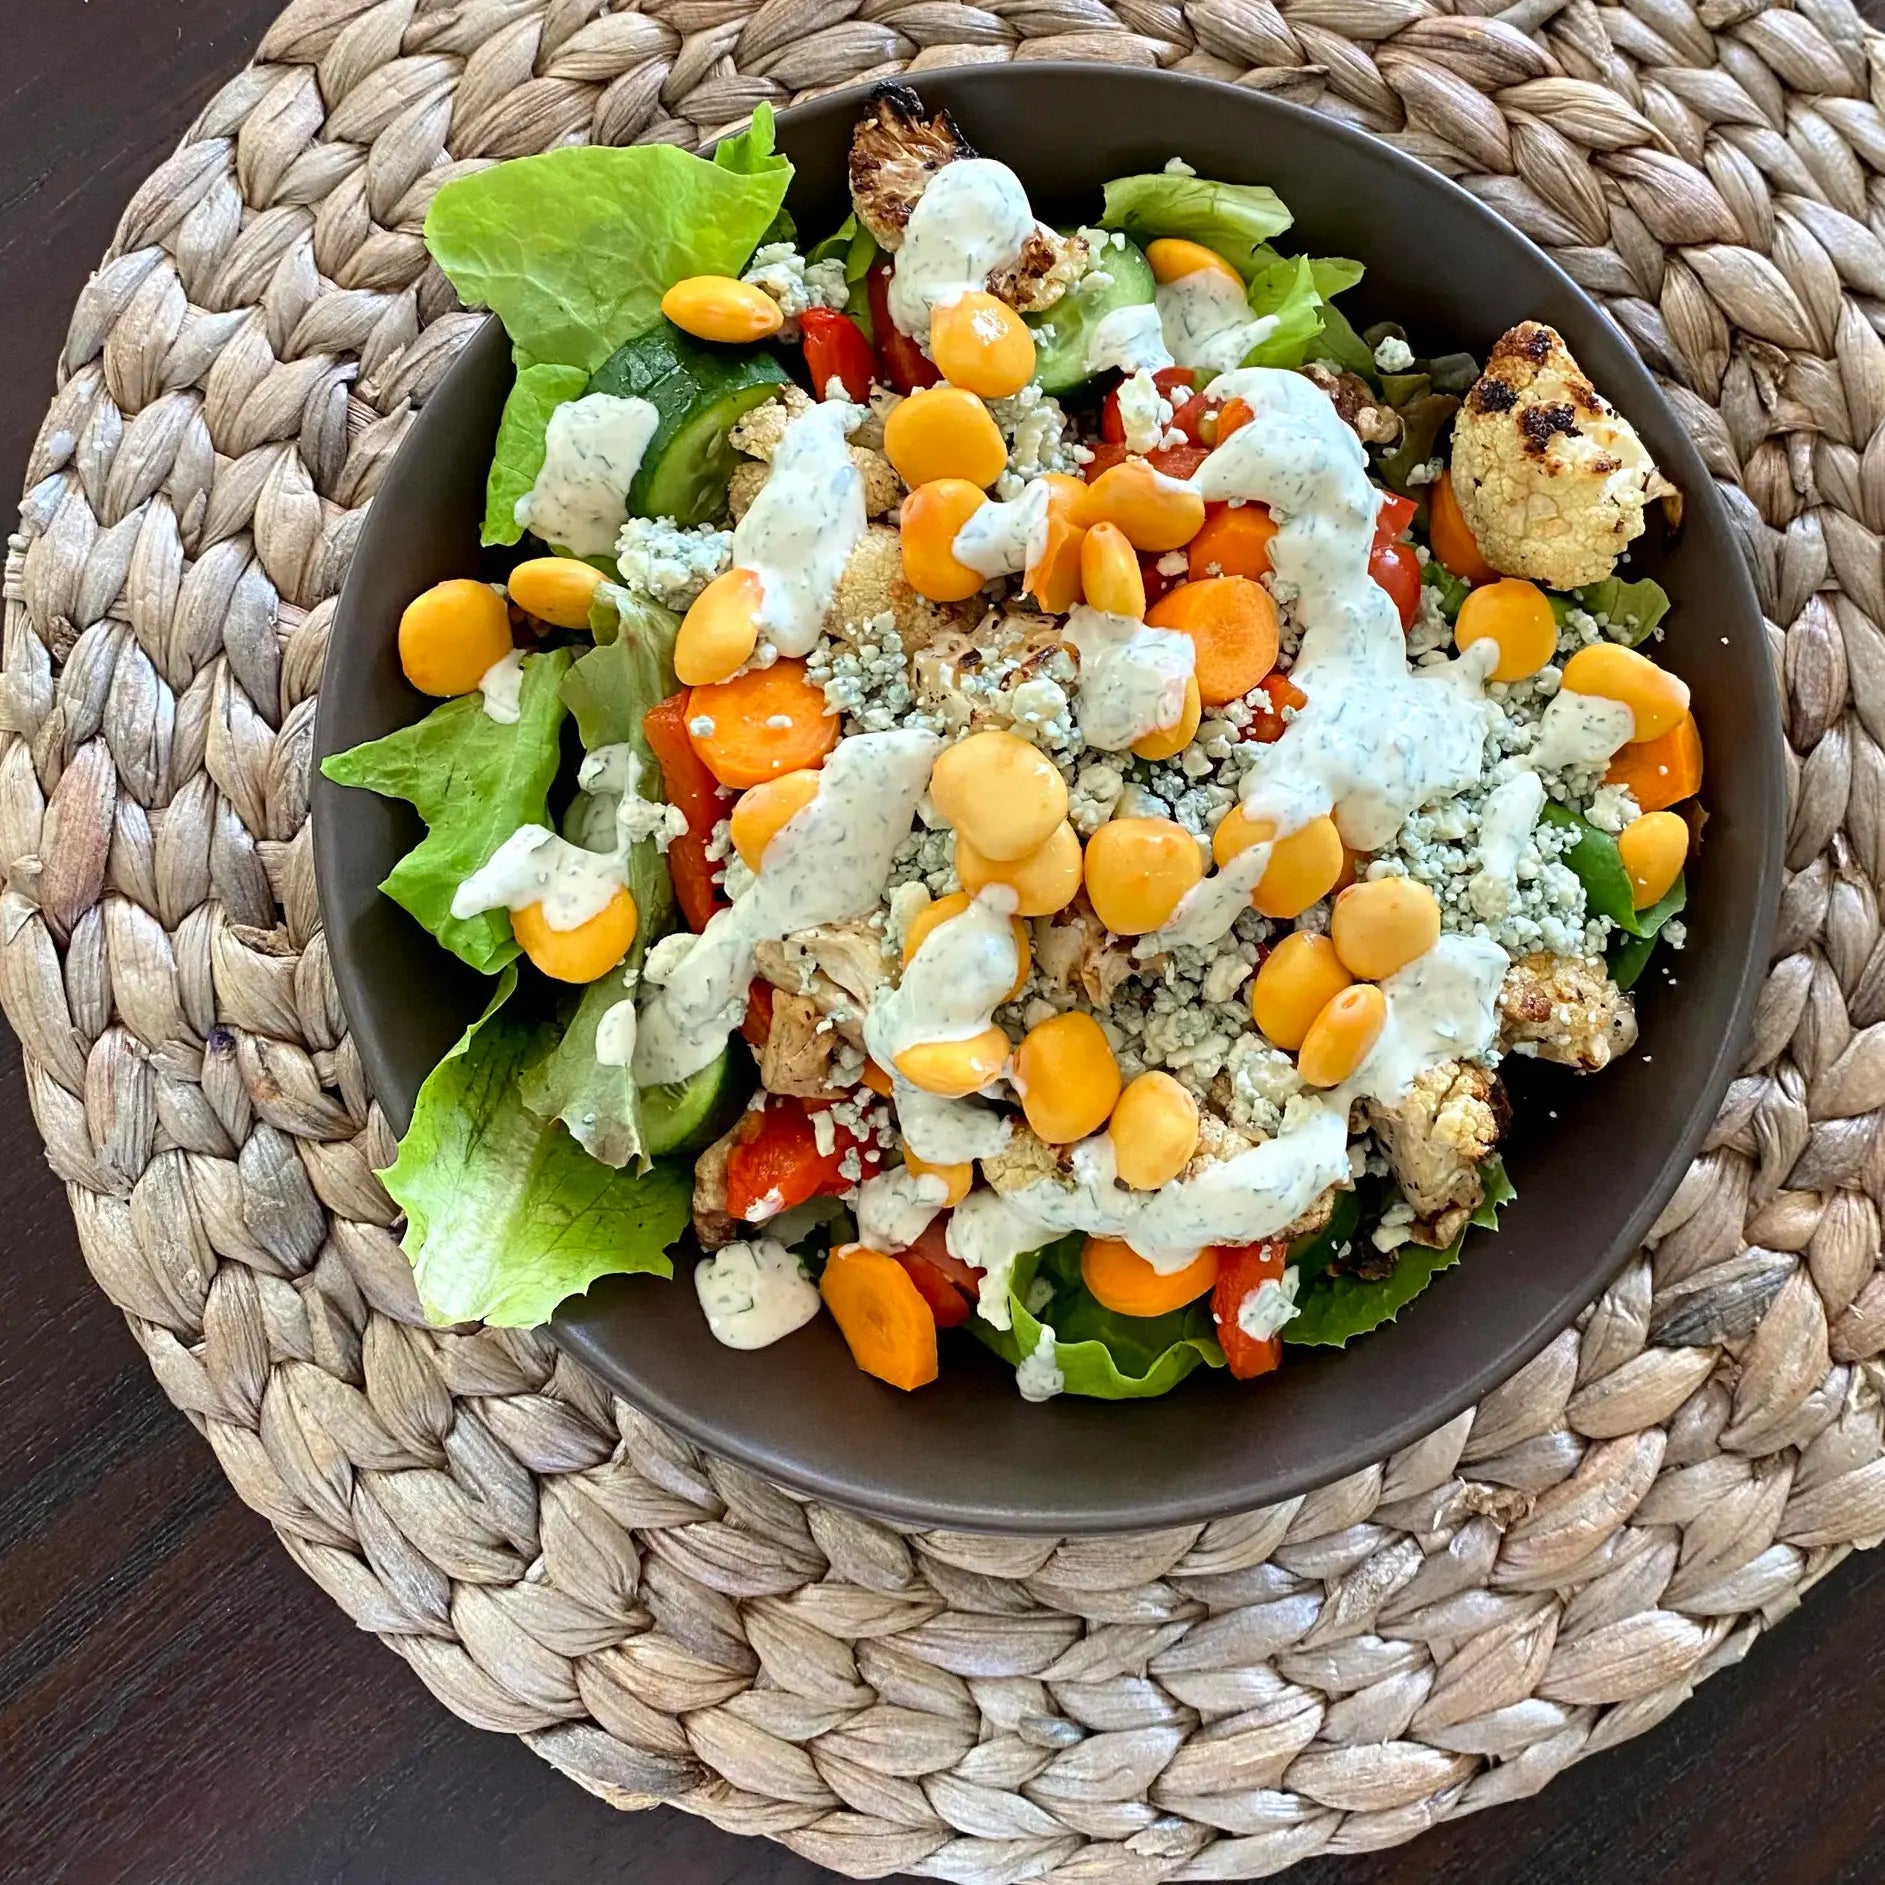 HARVEST SALAD WITH BLUE CHEESE DRESSING